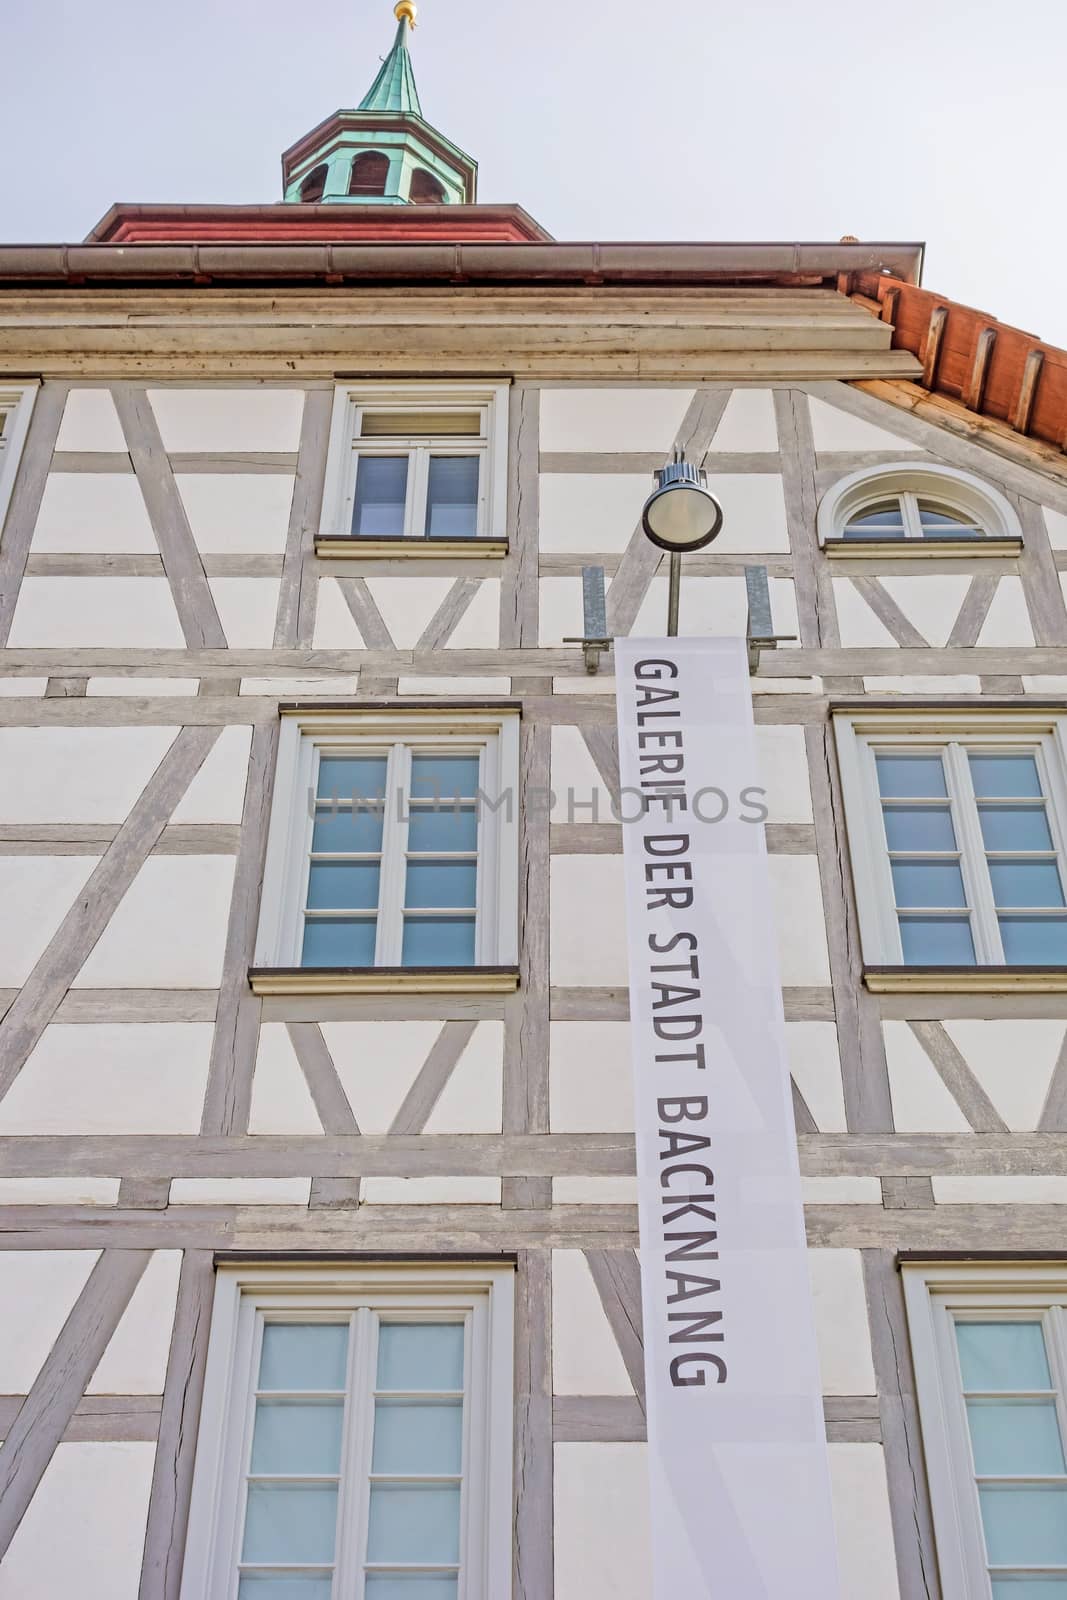 Backnang, Germany - April 2, 2016: Art gallery of the city of Backnang (Galerie der Stadt Backnang). It hosts different exhibitions each year with oeuvres from regional and national artists.